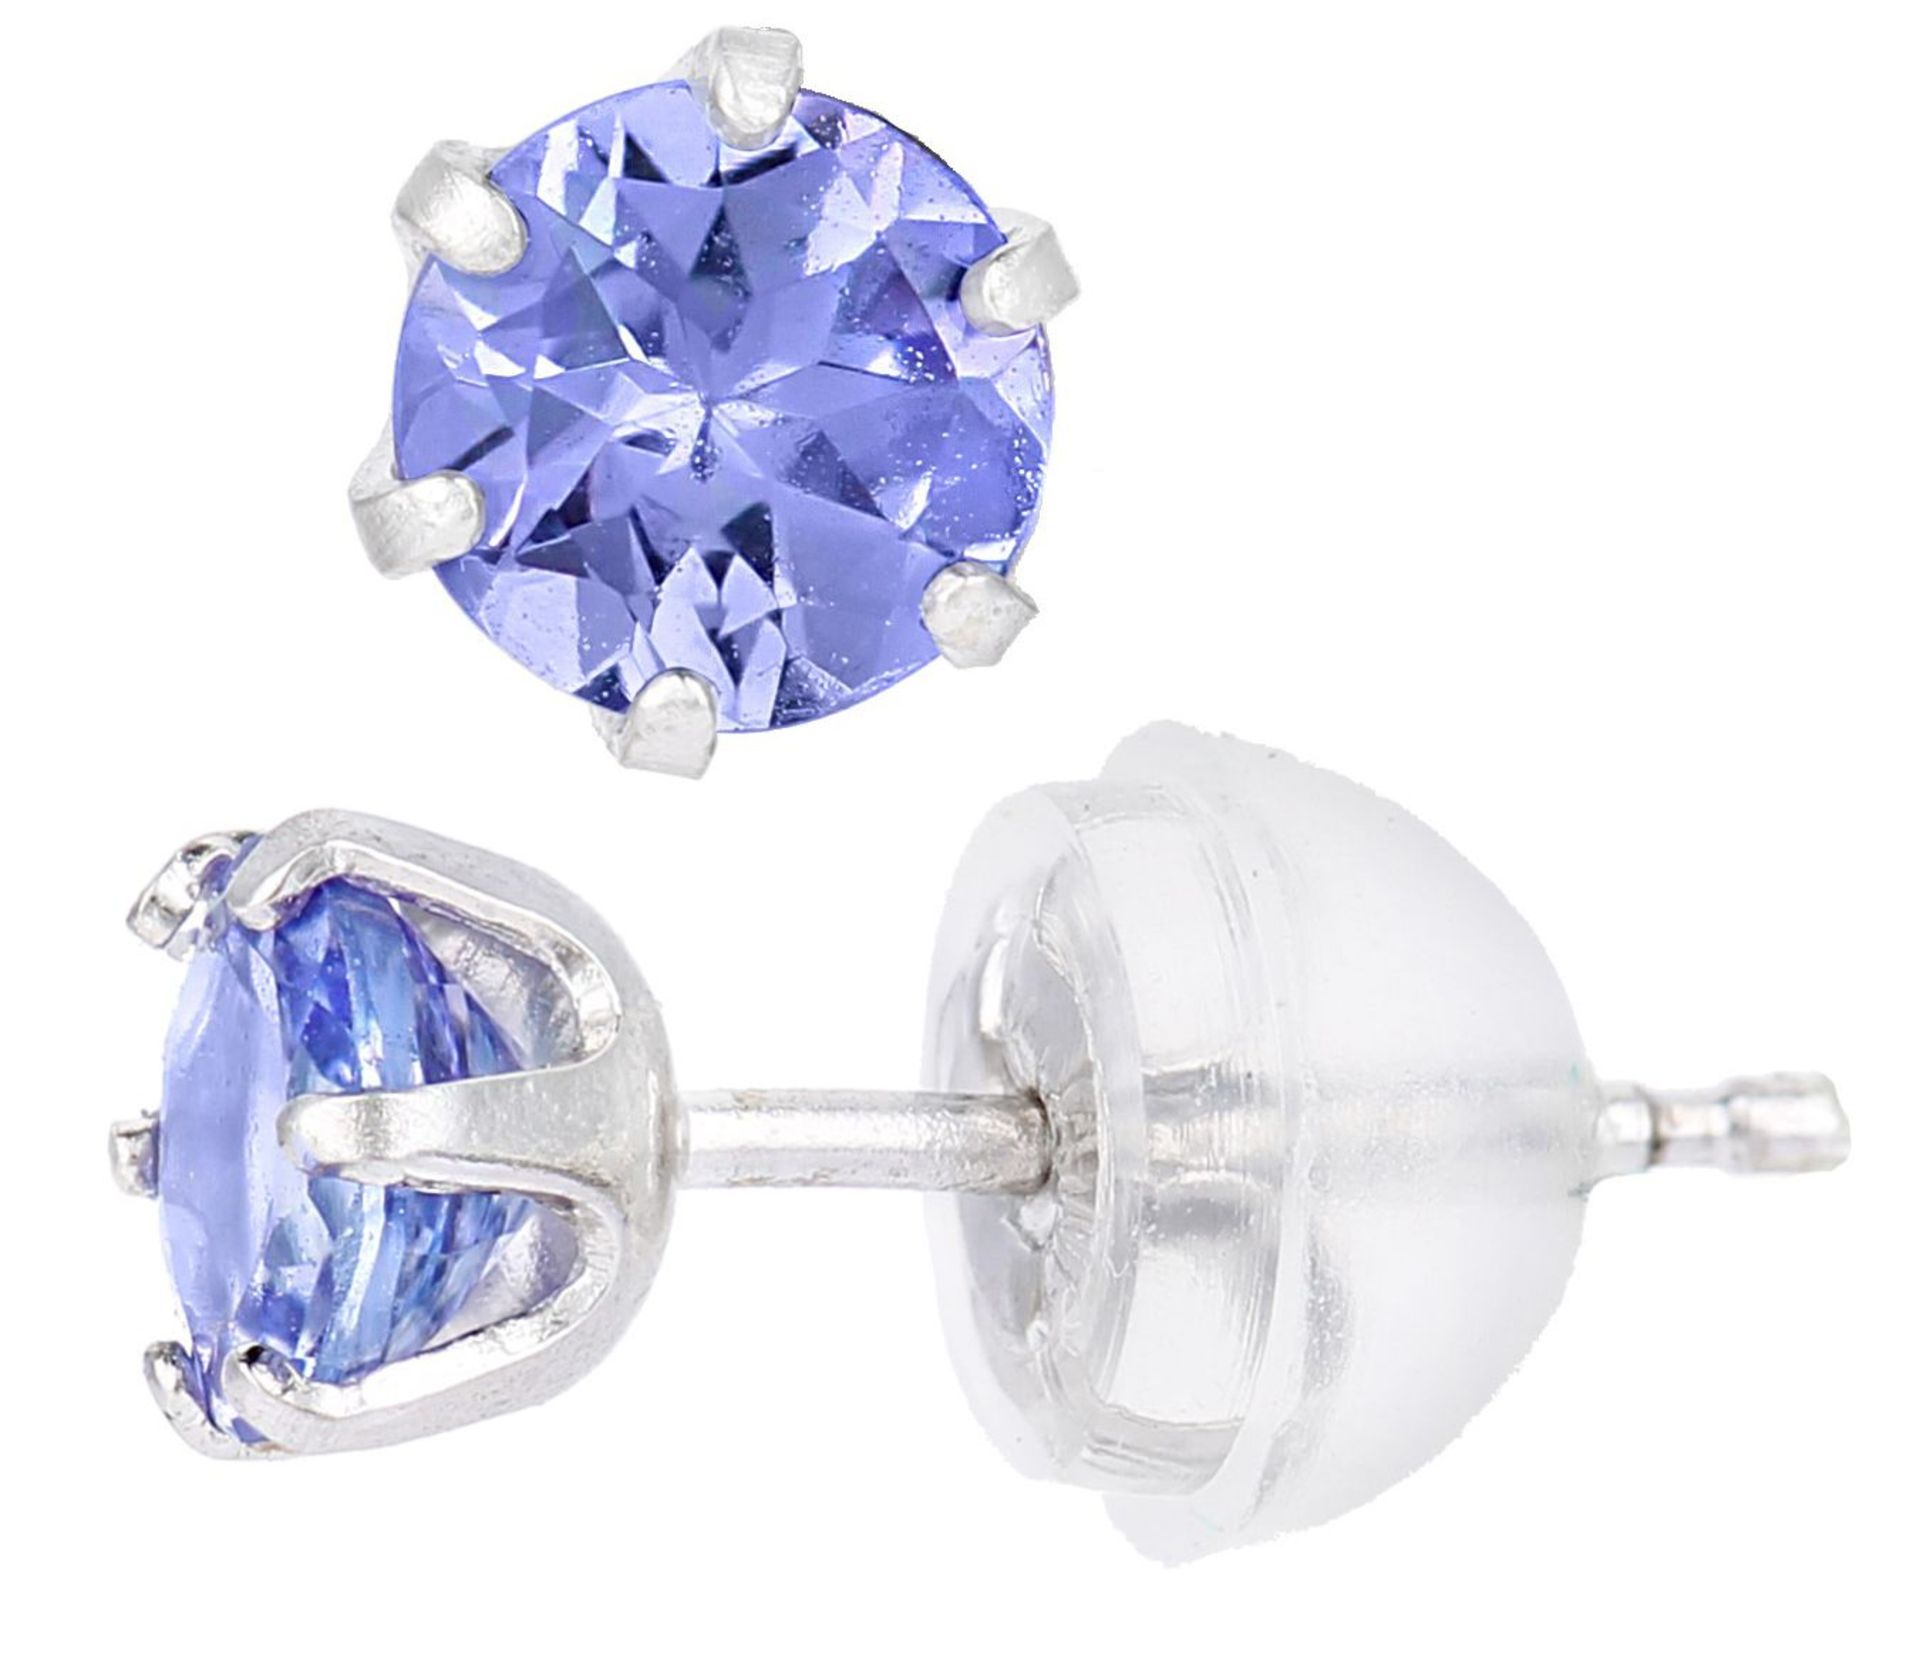 Tanzanite stud earrings in 18ct white gold, Metal 18ct White Gold, Weight 0.59, RRP £234.00 (